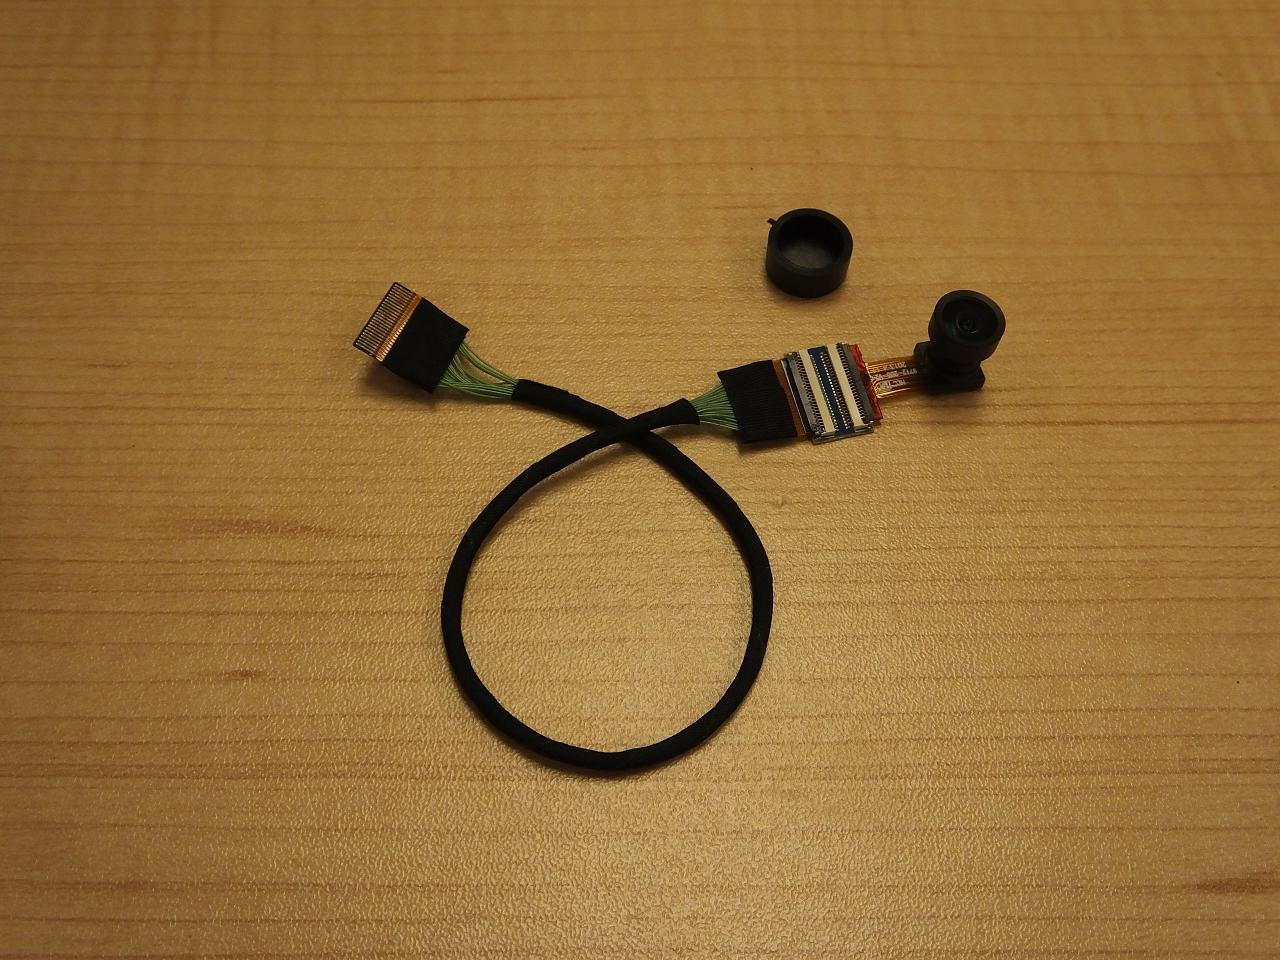 This is the lens extension wire